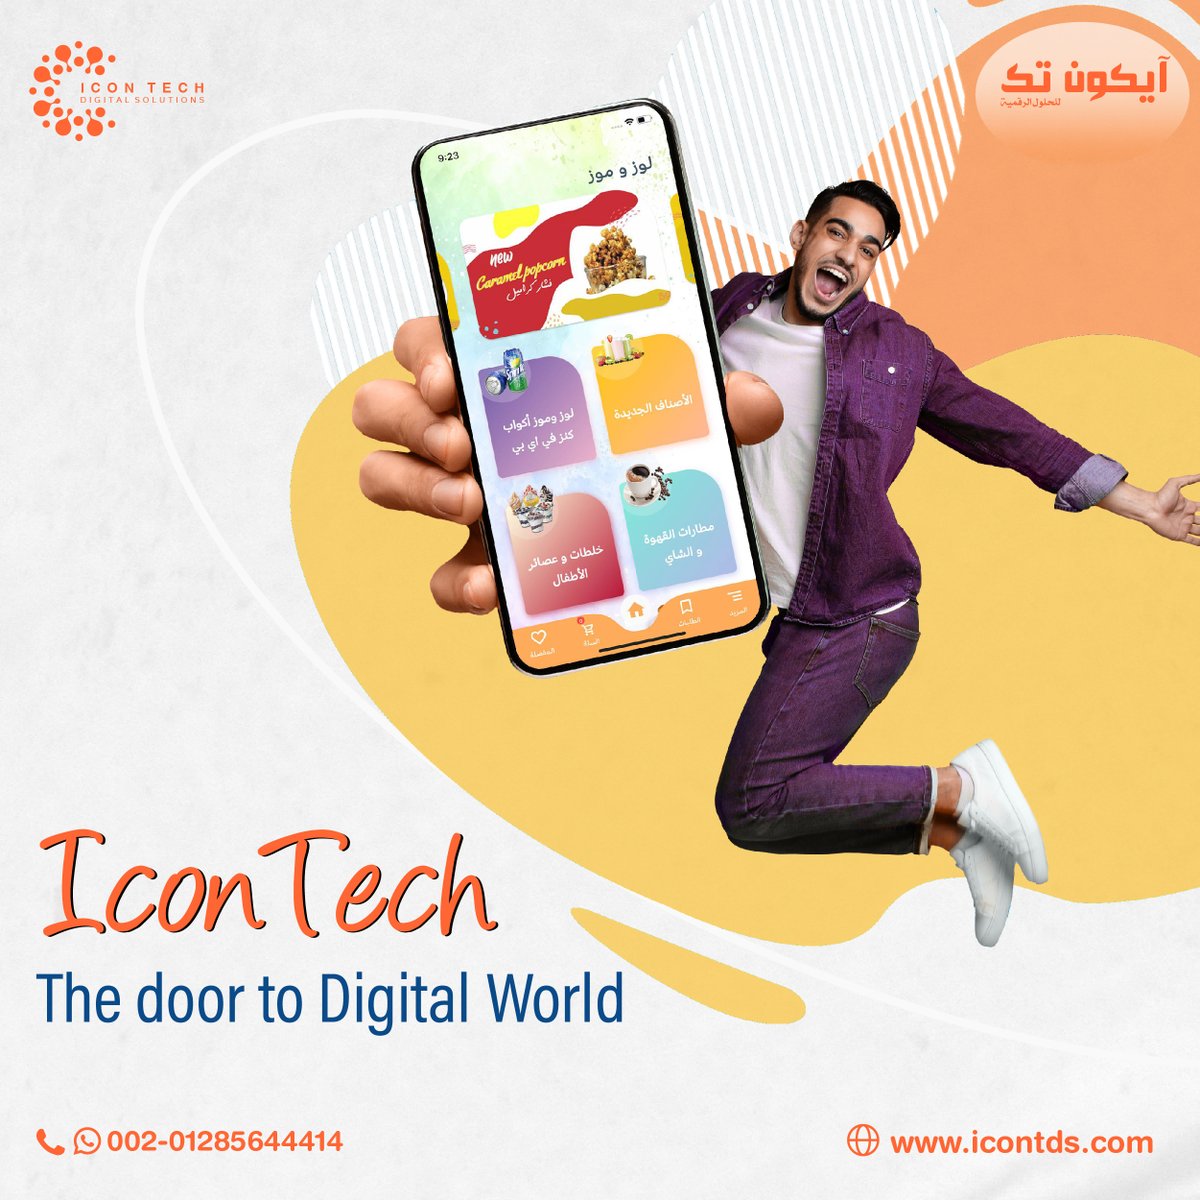 If you're in need of softwaredevelopment,
mobileapps, or an ecommercestore, #IconTech is the answer📱🌐

We'll help kickstart your project and take the first step towards success🚀

Contact us :
icontds.com
00201285644414

Let's build something amazing💡
#TechSolution